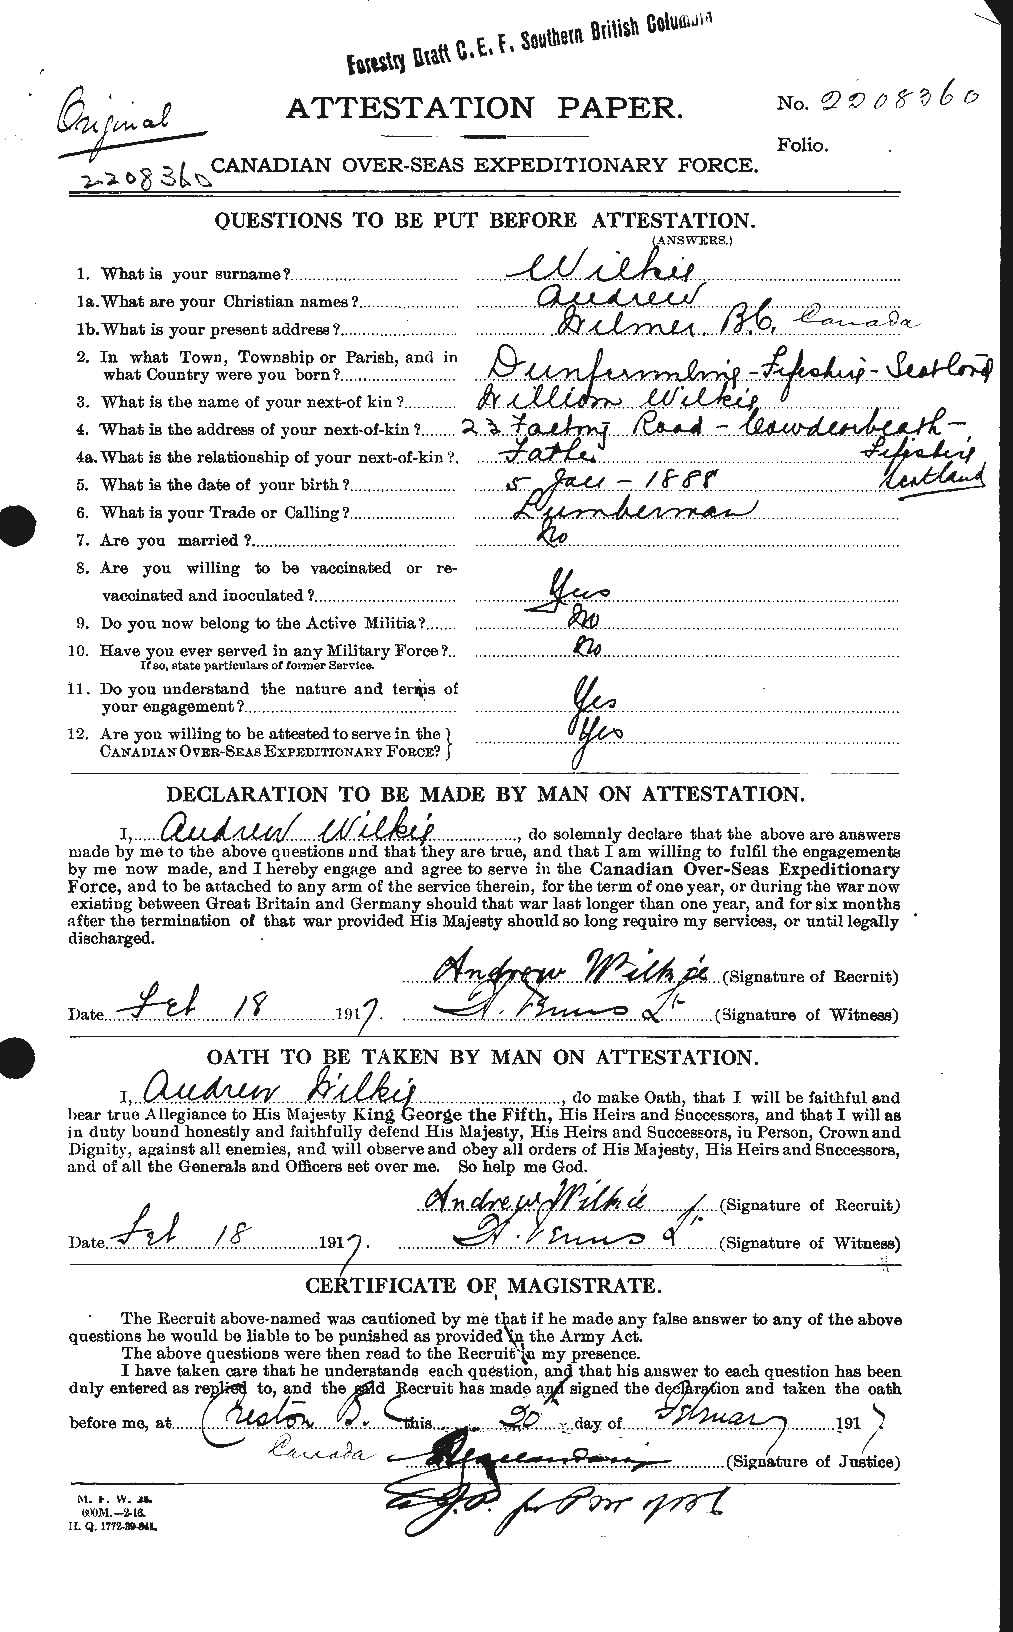 Personnel Records of the First World War - CEF 680412a